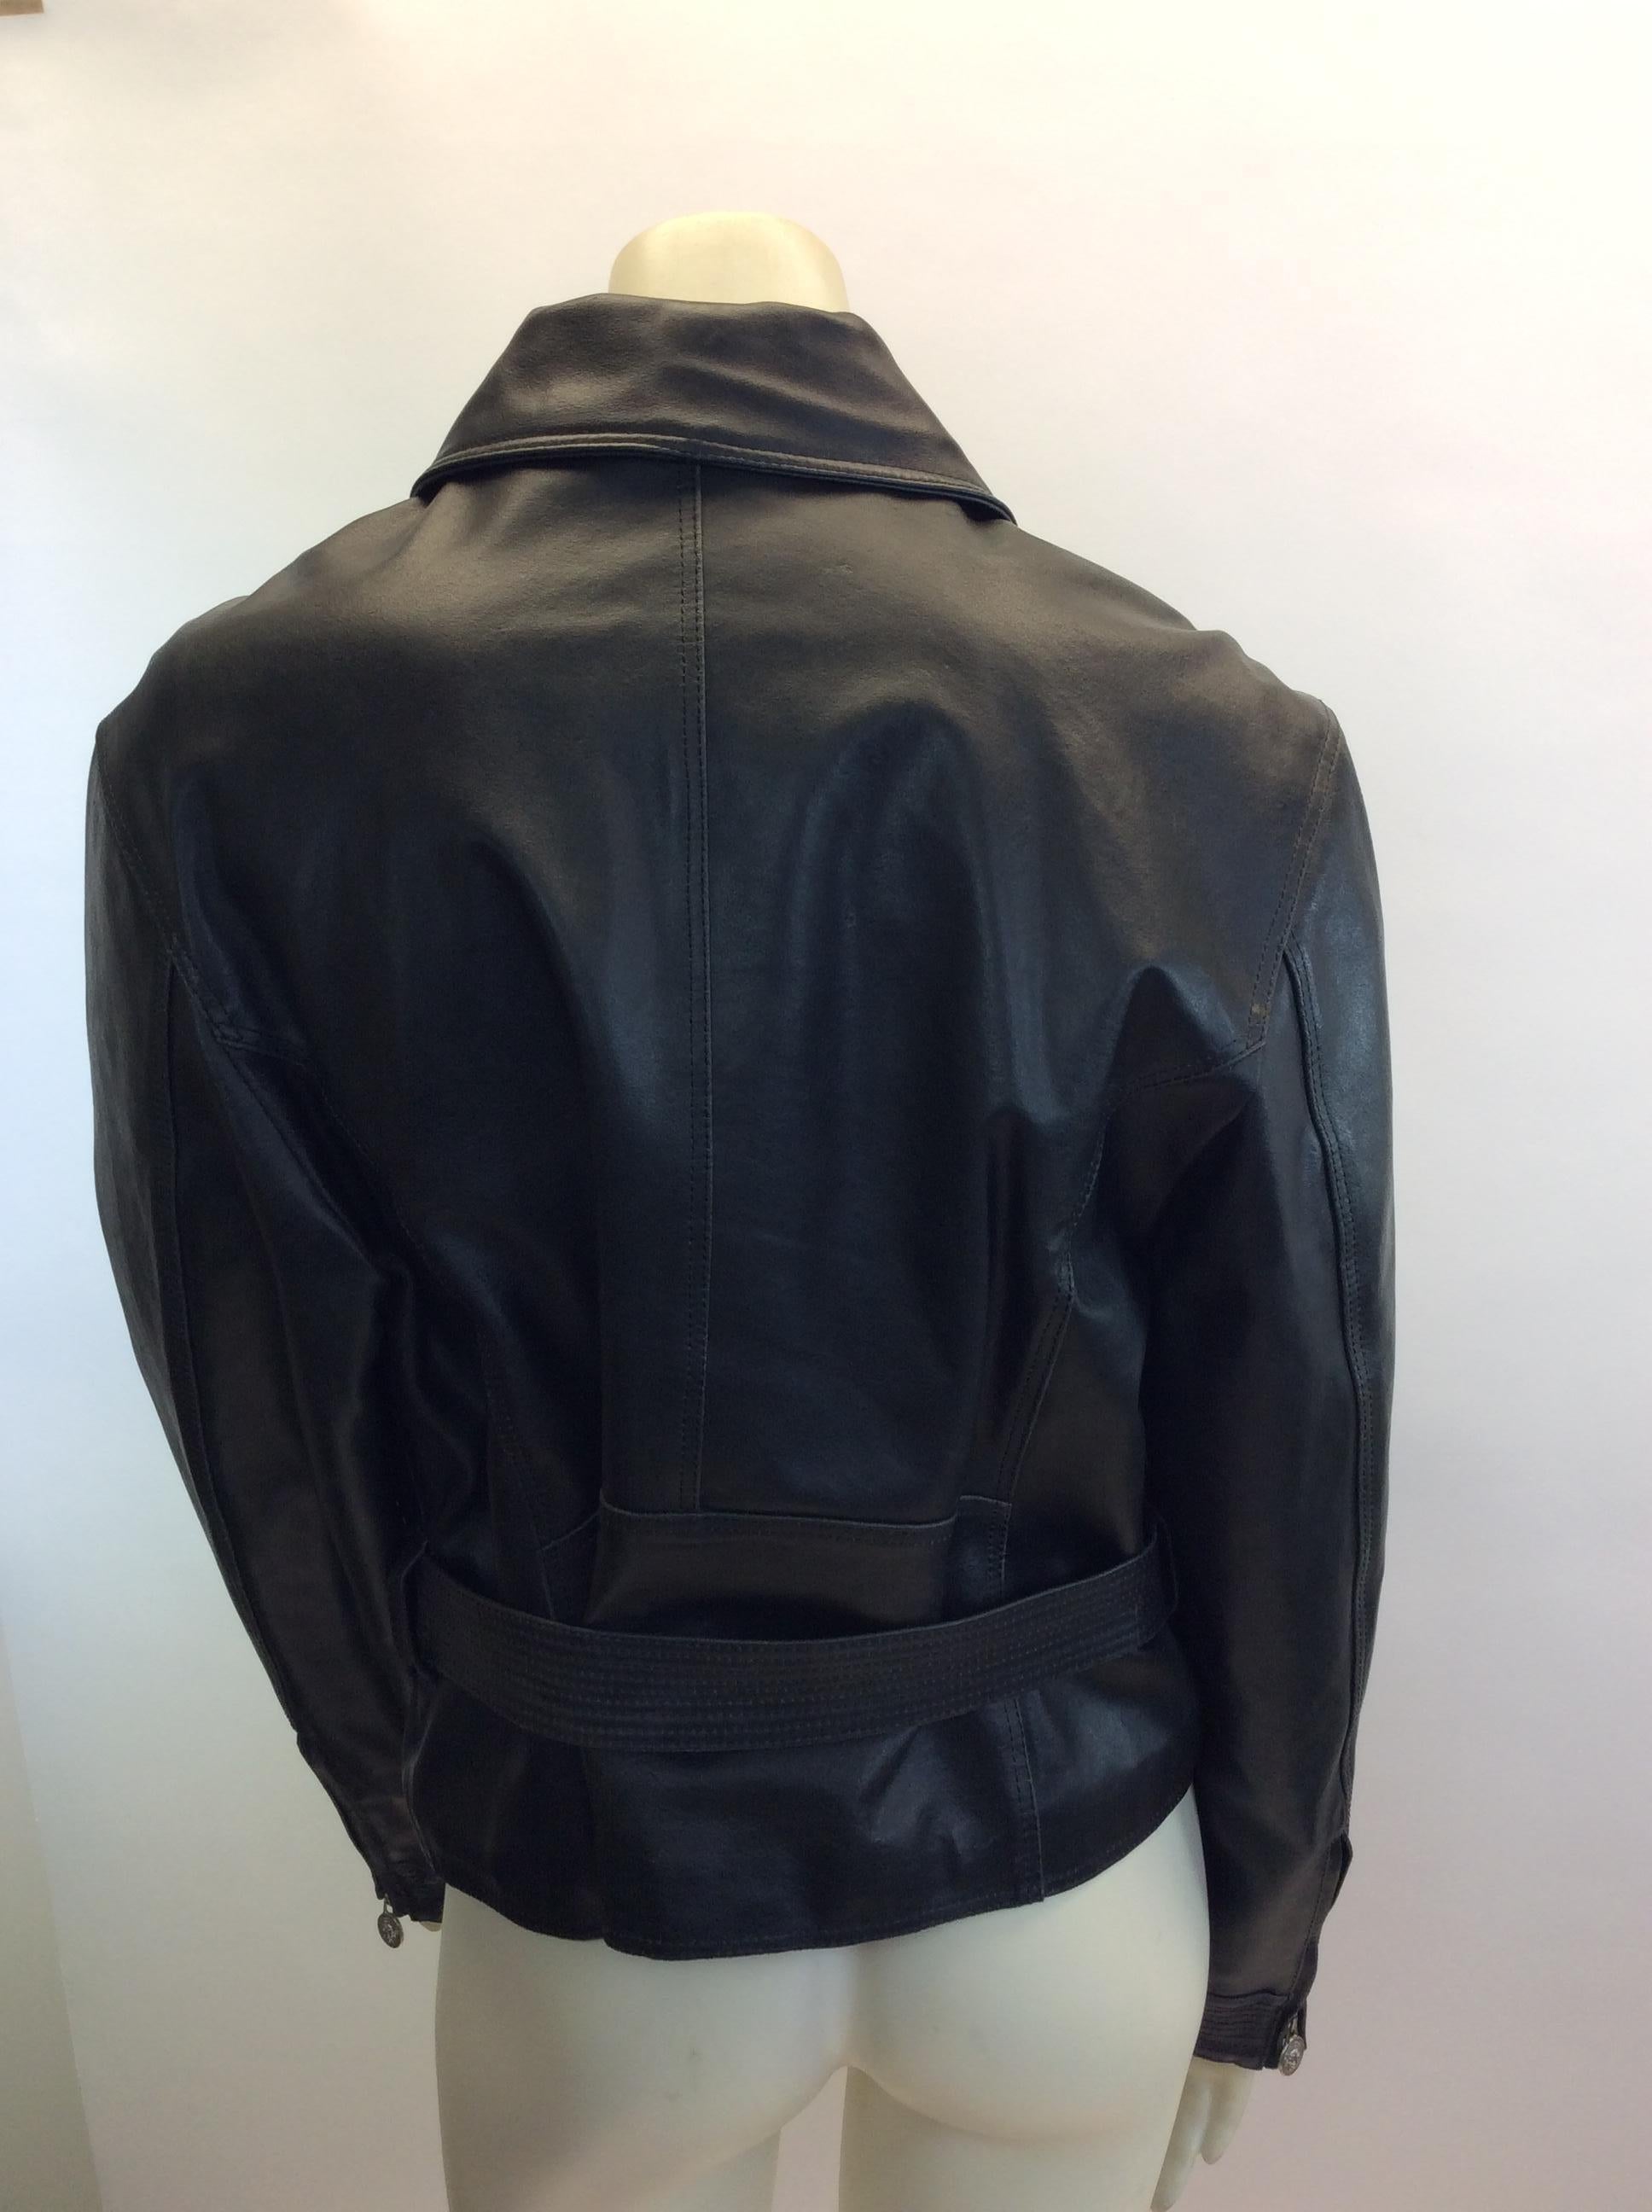 Versace Black Leather Jacket with Silver Buttons In Good Condition For Sale In Narberth, PA